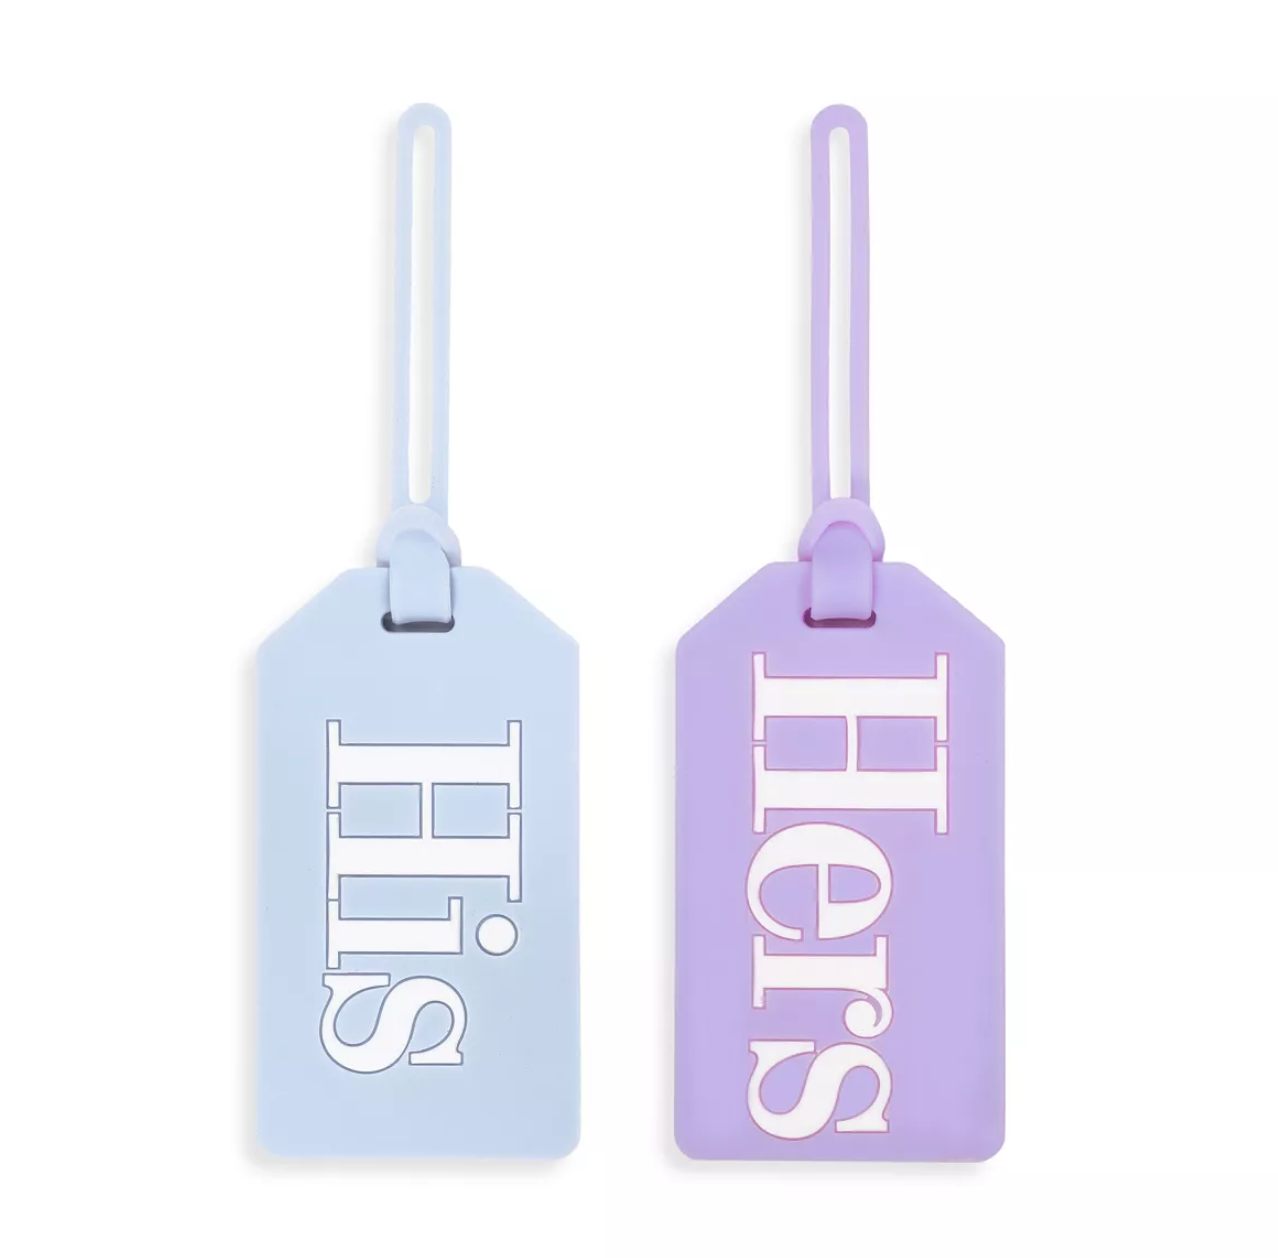 Kate Spade New York His & Hers Luggage Tags, Set of 2